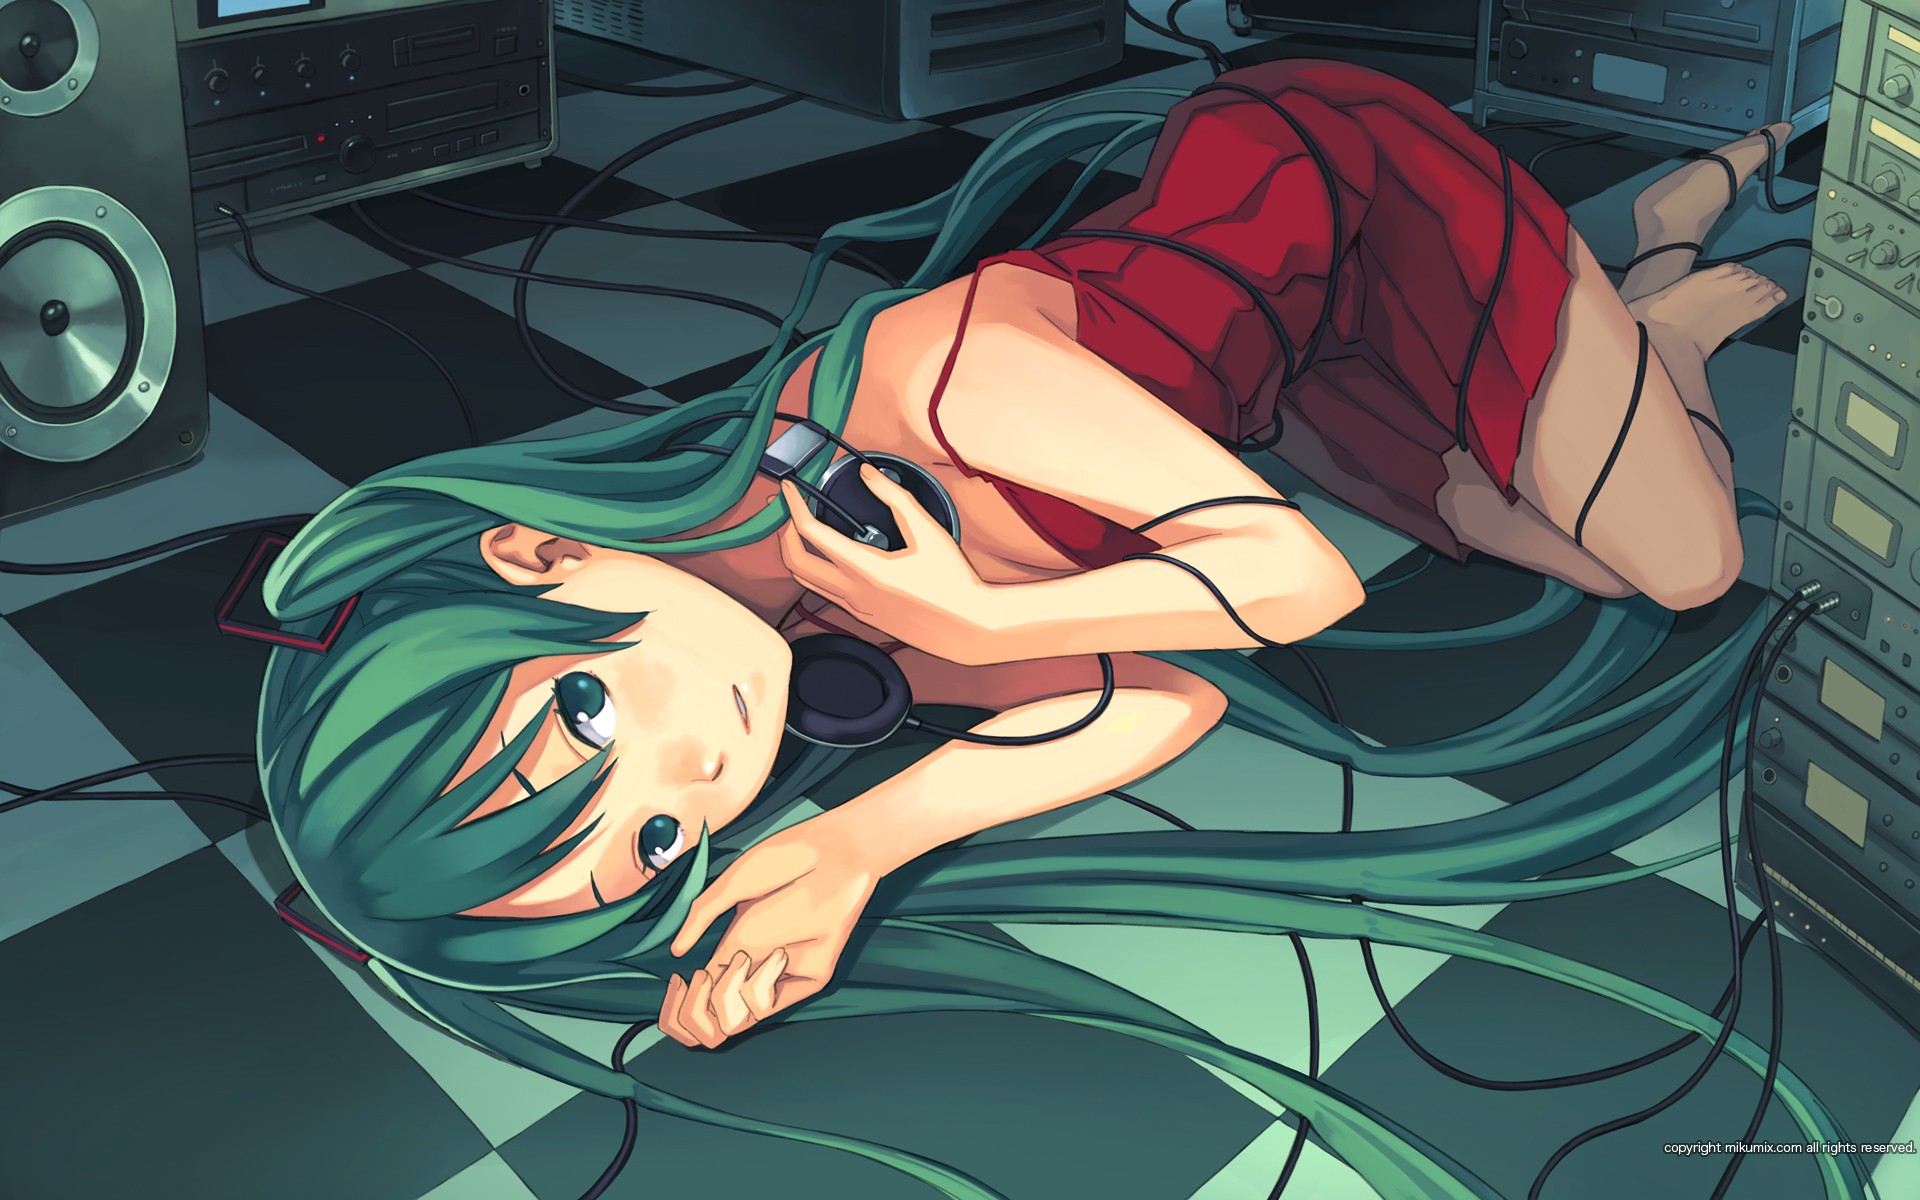 headphones, Music, Vocaloid, Dress, Hatsune, Miku, Long, Hair, Speakers, Green, Eyes, Green, Hair, Twintails, Red, Dress, Lying, Down, Wires, Cables Wallpaper